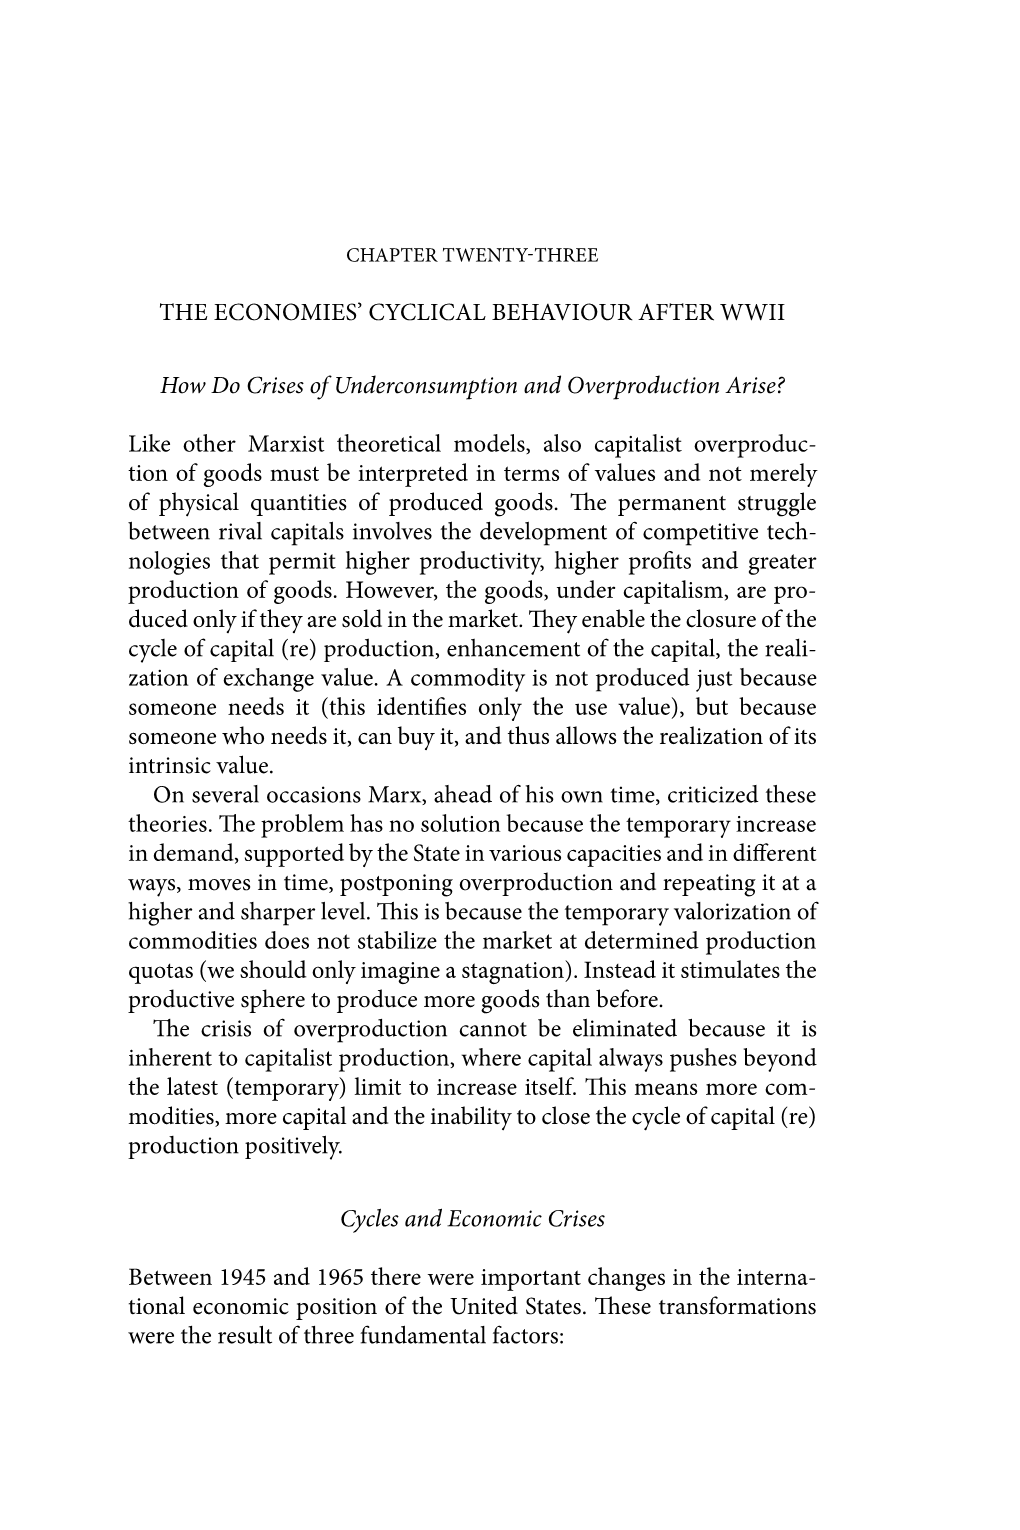 The Economies' Cyclical Behaviour After Wwii